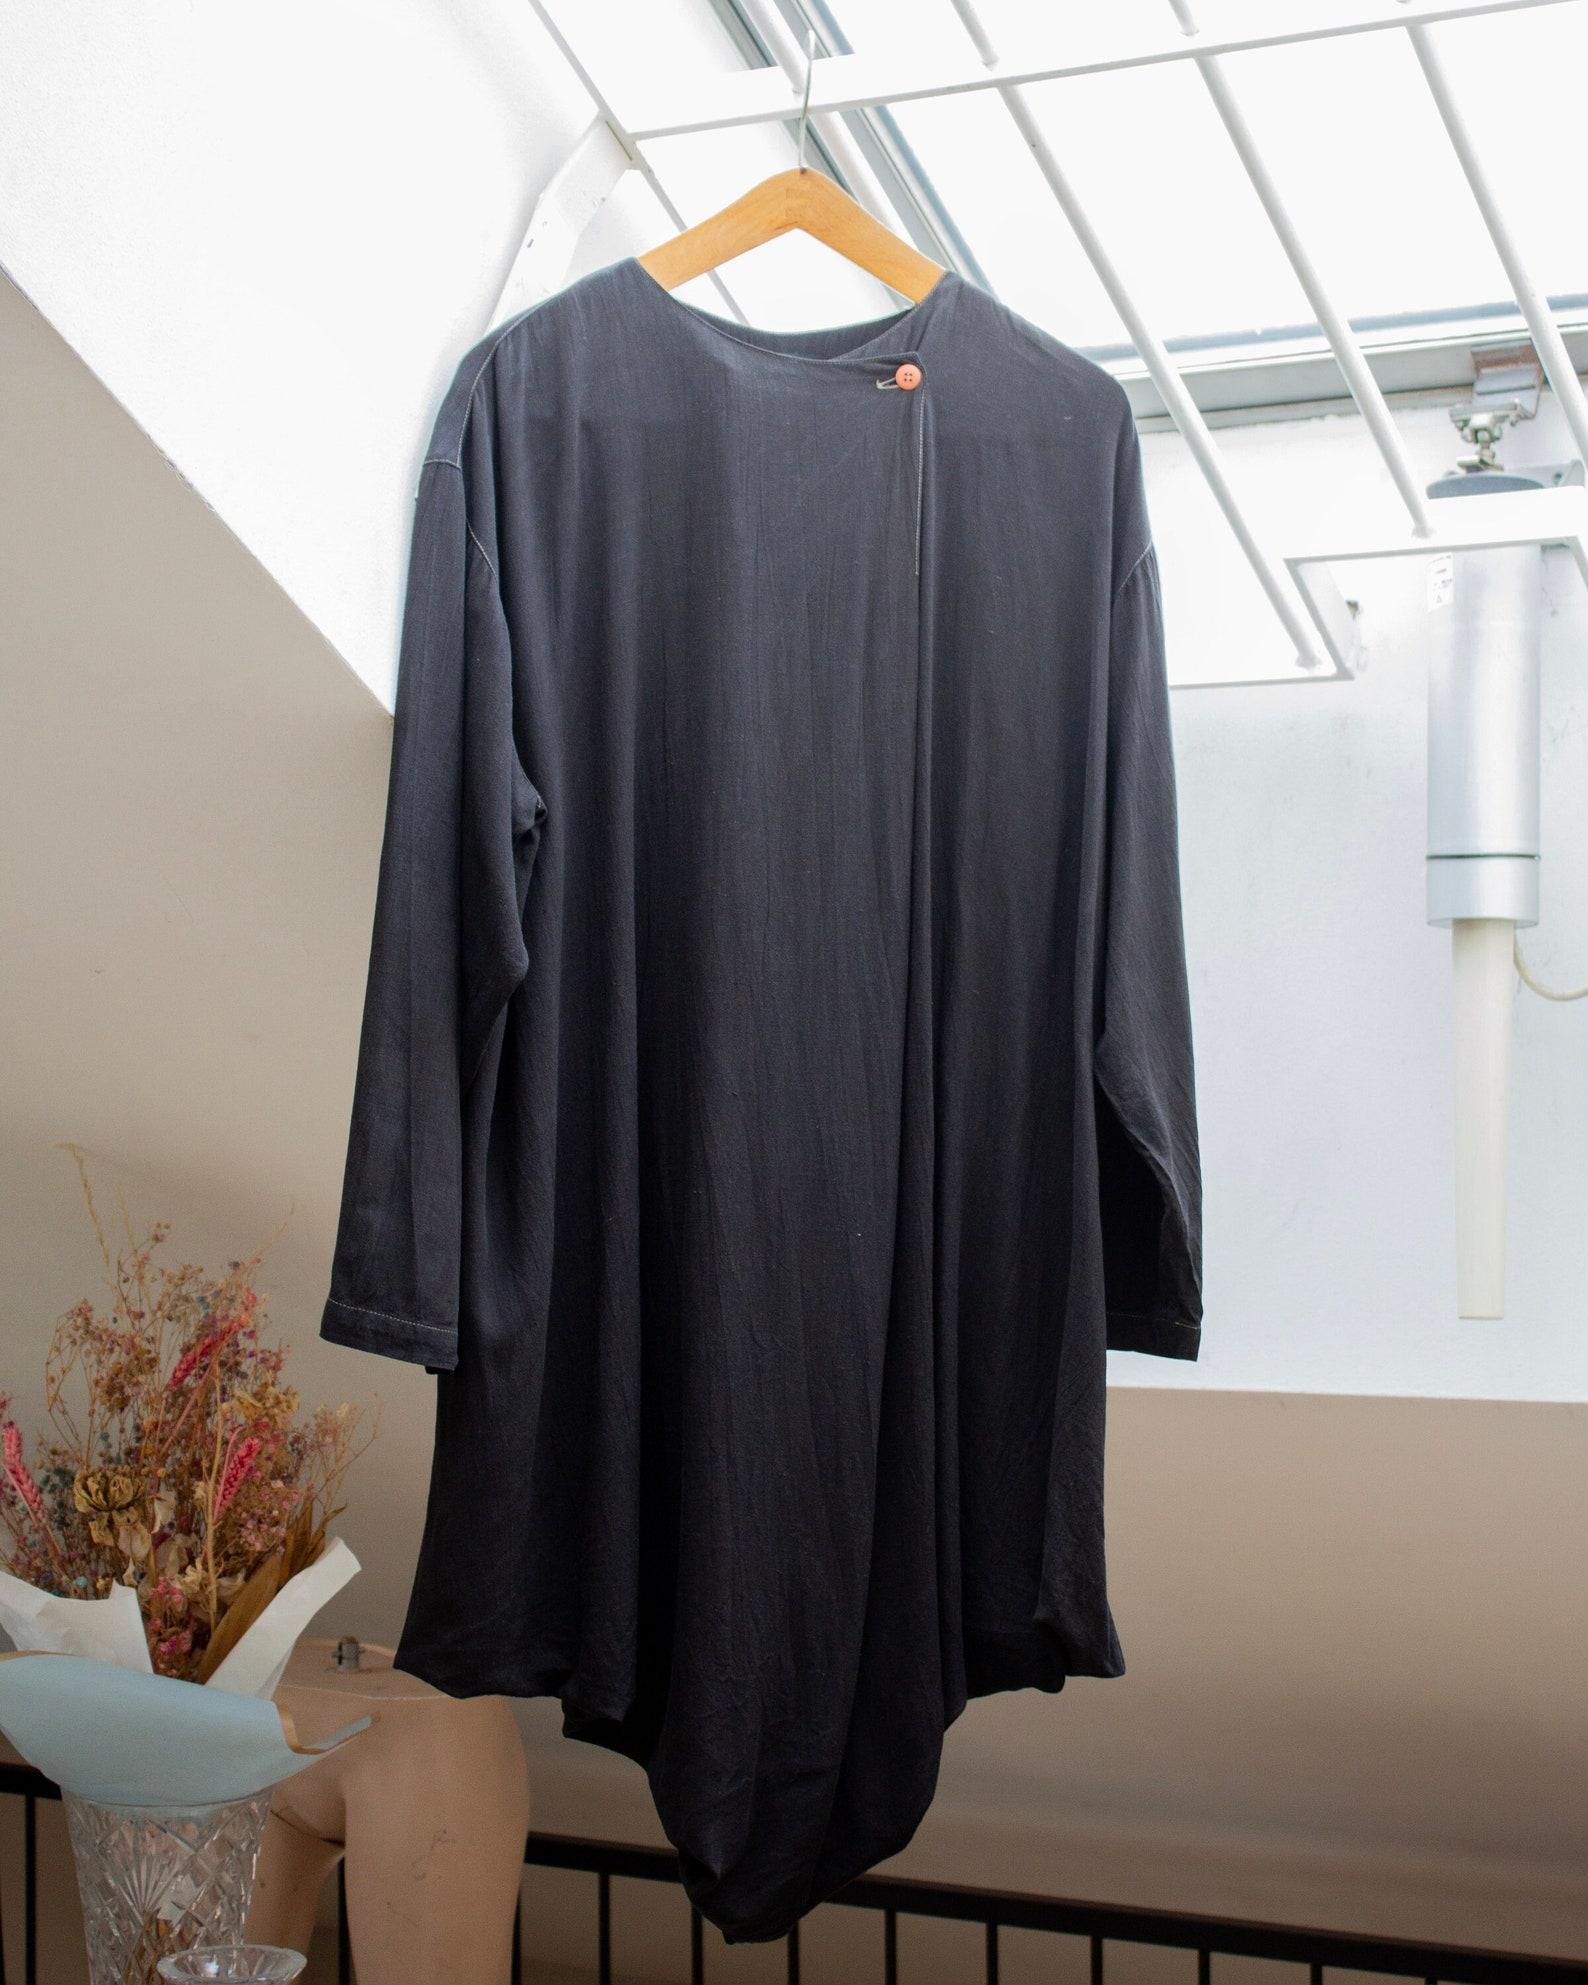 Issey Miyake Permanente 1980's black mud cotton and linen cocoon draped Haori style duster coat made in Japan (M)
Buttons neck closure 
Unlined 
No pockets 
Cotton and linen 
Made in Japan
Size M, check the measurements below
Very good vintage